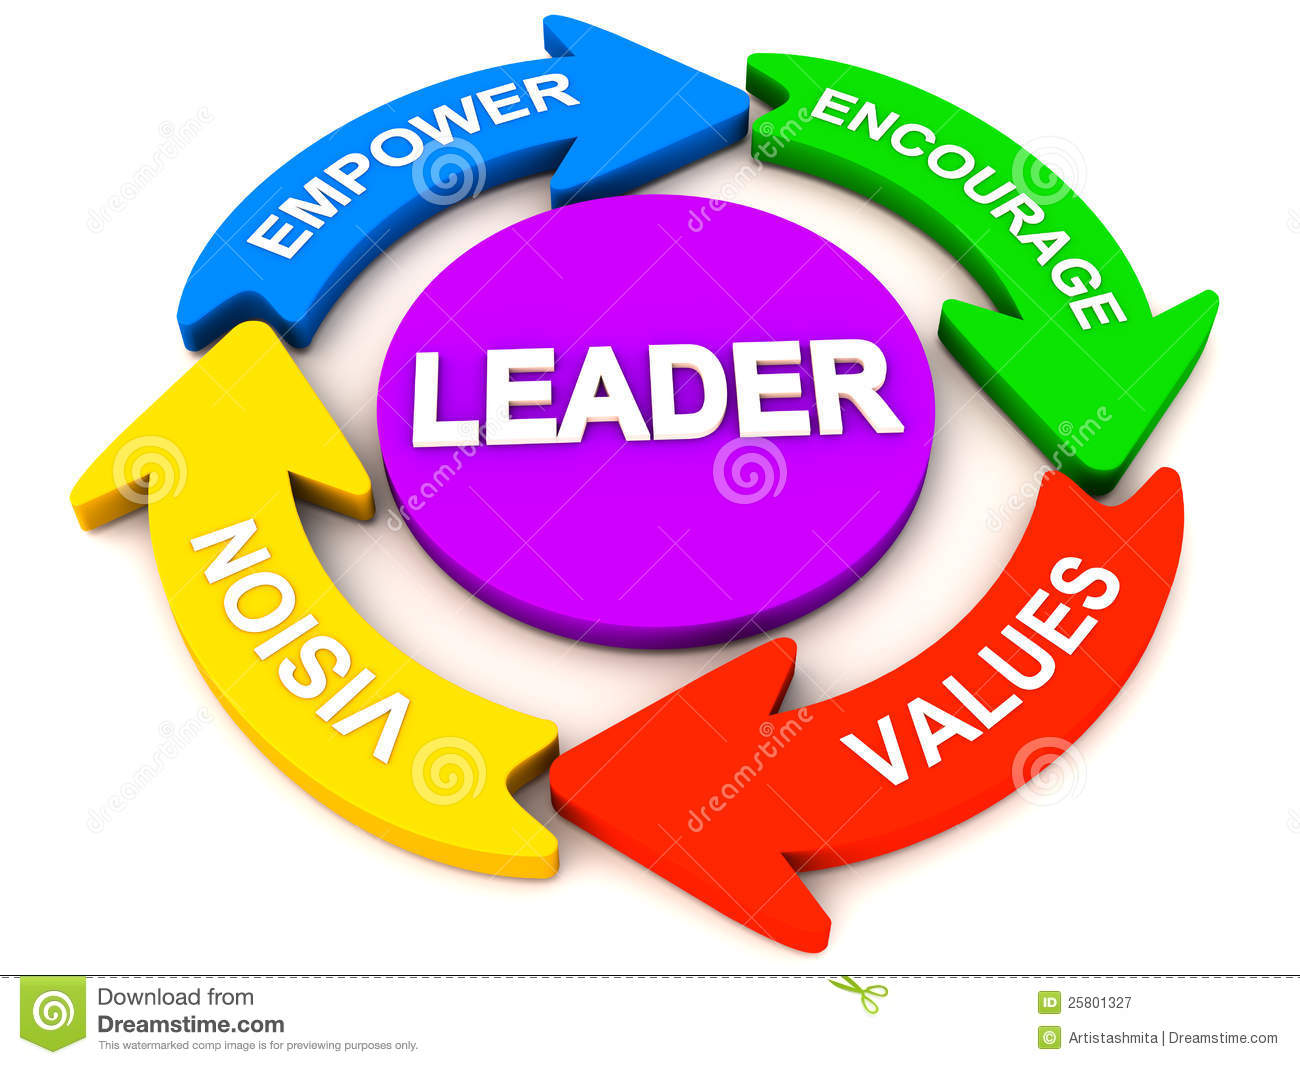 Leadership Requires Vision Values Encouragement And A Leader Should